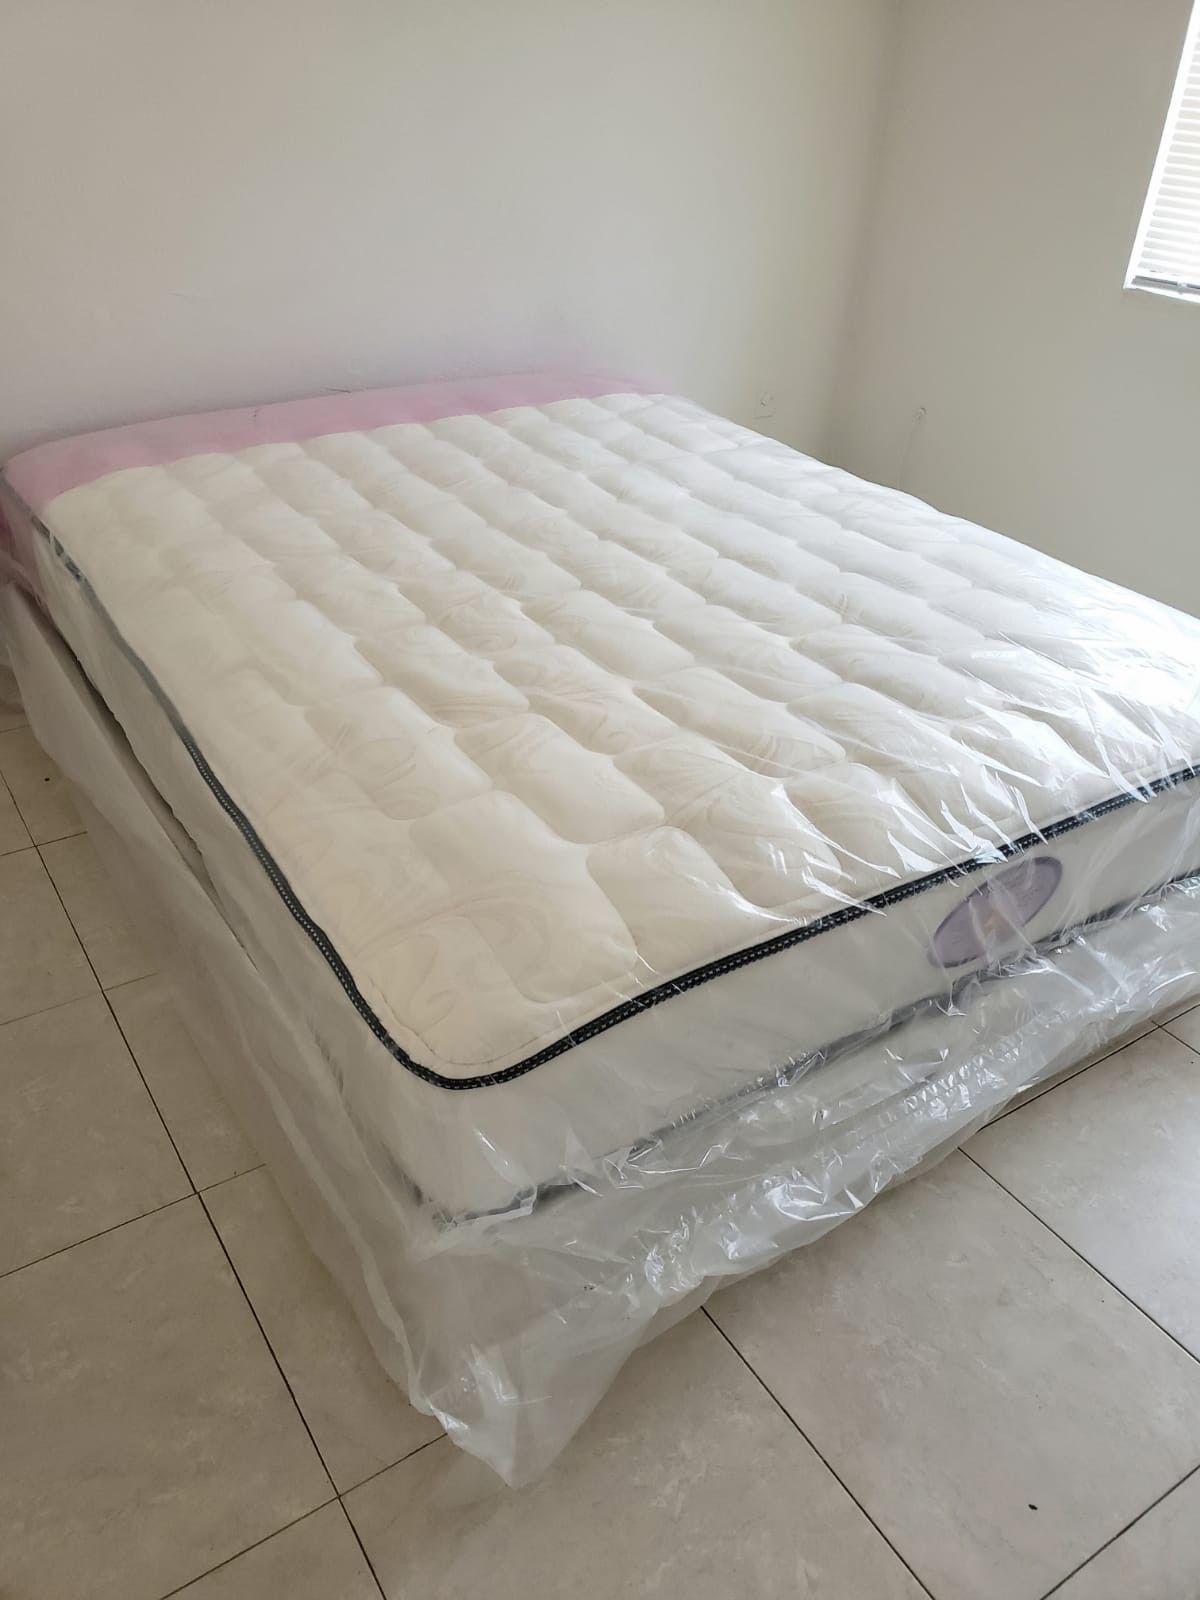 NEW FULL MATTRESS AND BOX SPRING, Bed frame is not included